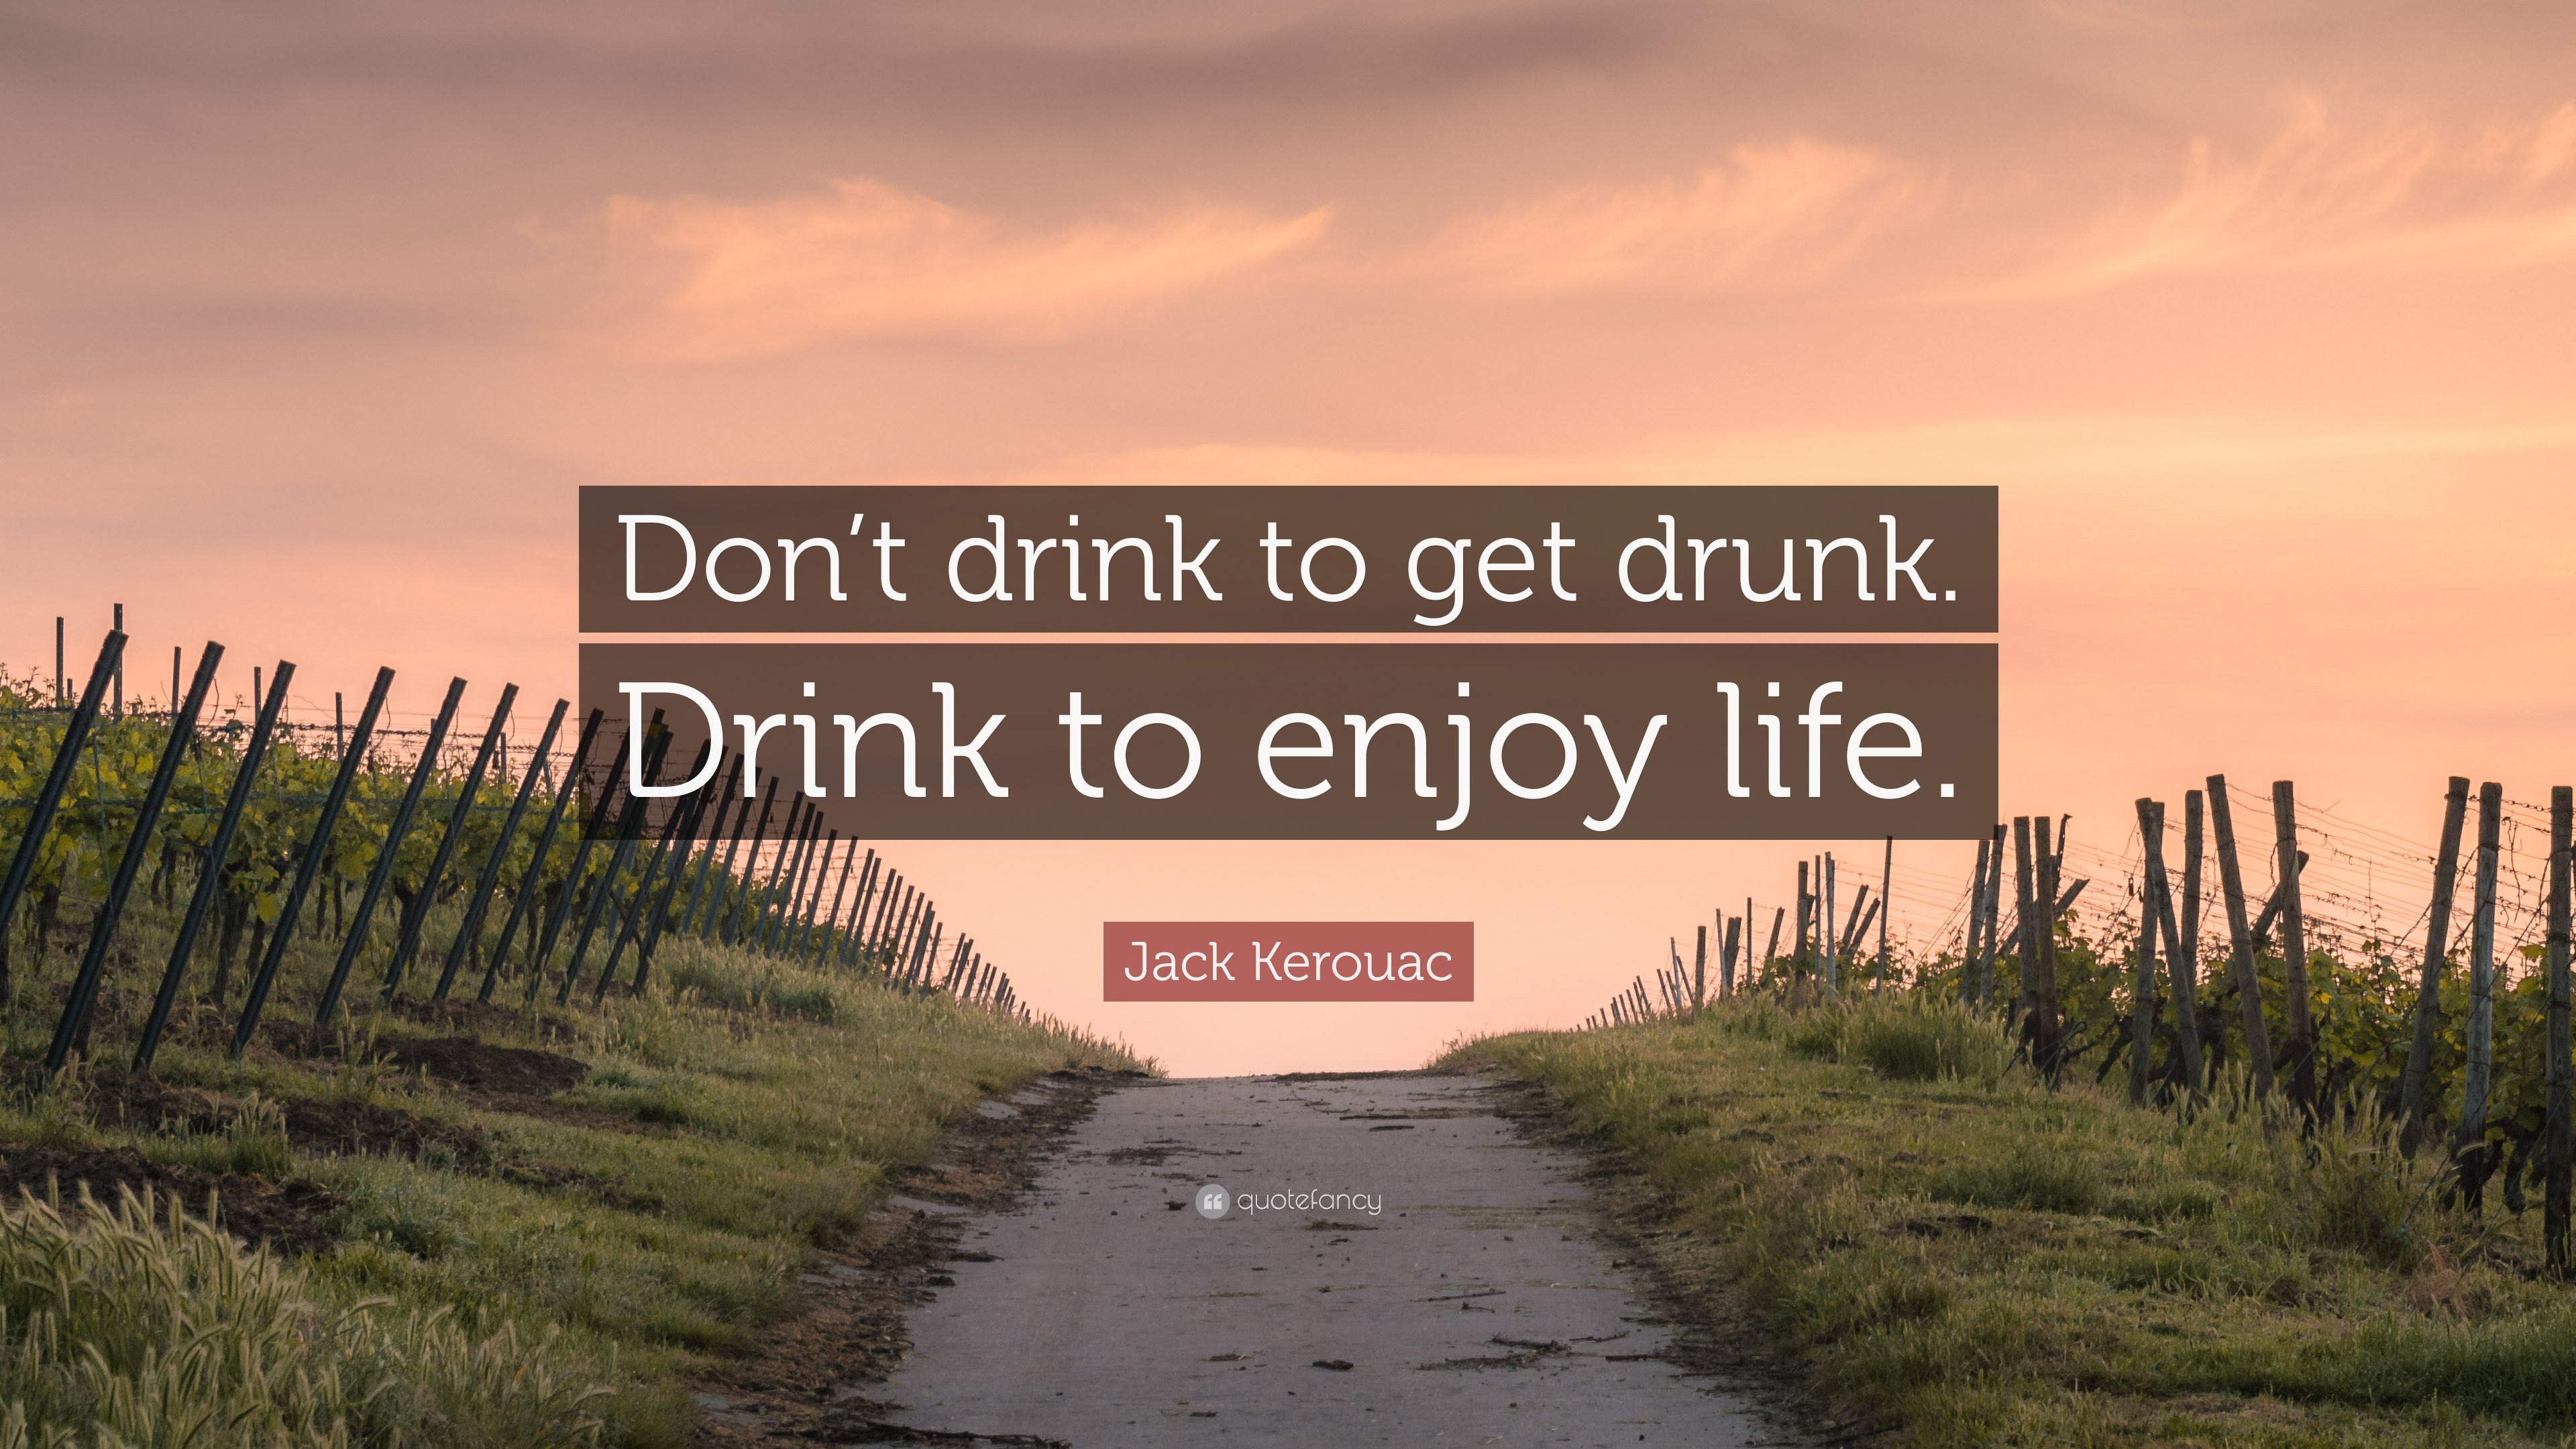 Jack Kerouac Quote “Don t drink to drunk Drink to enjoy